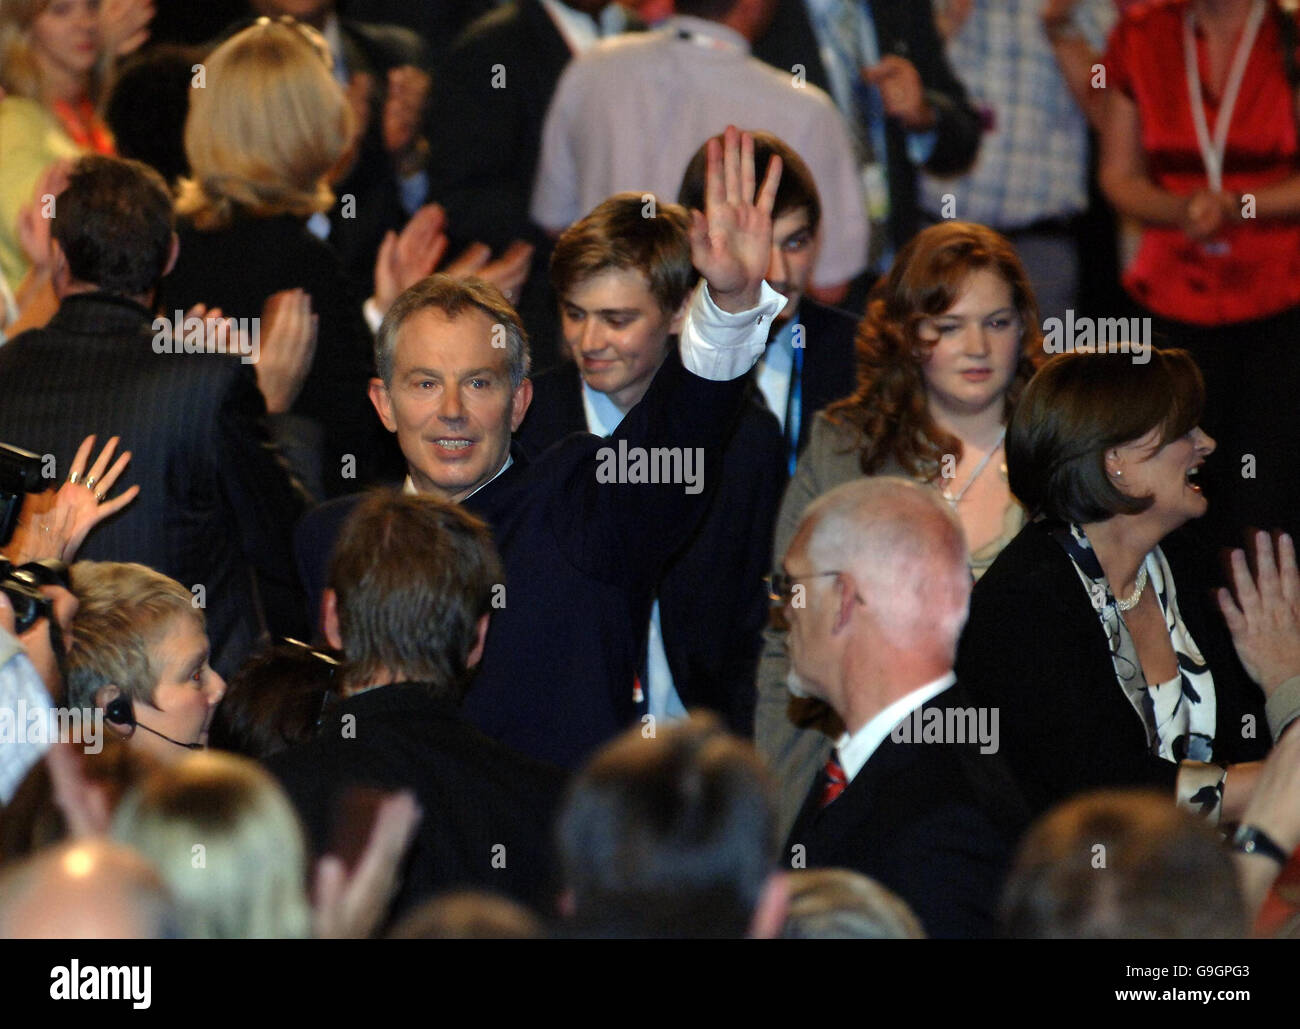 Prime Minister Tony Blair with his wife Cherie and other family members including Euan, Kathryn and Nicky after his speech to the Labour Party conference in Manchester. Stock Photo